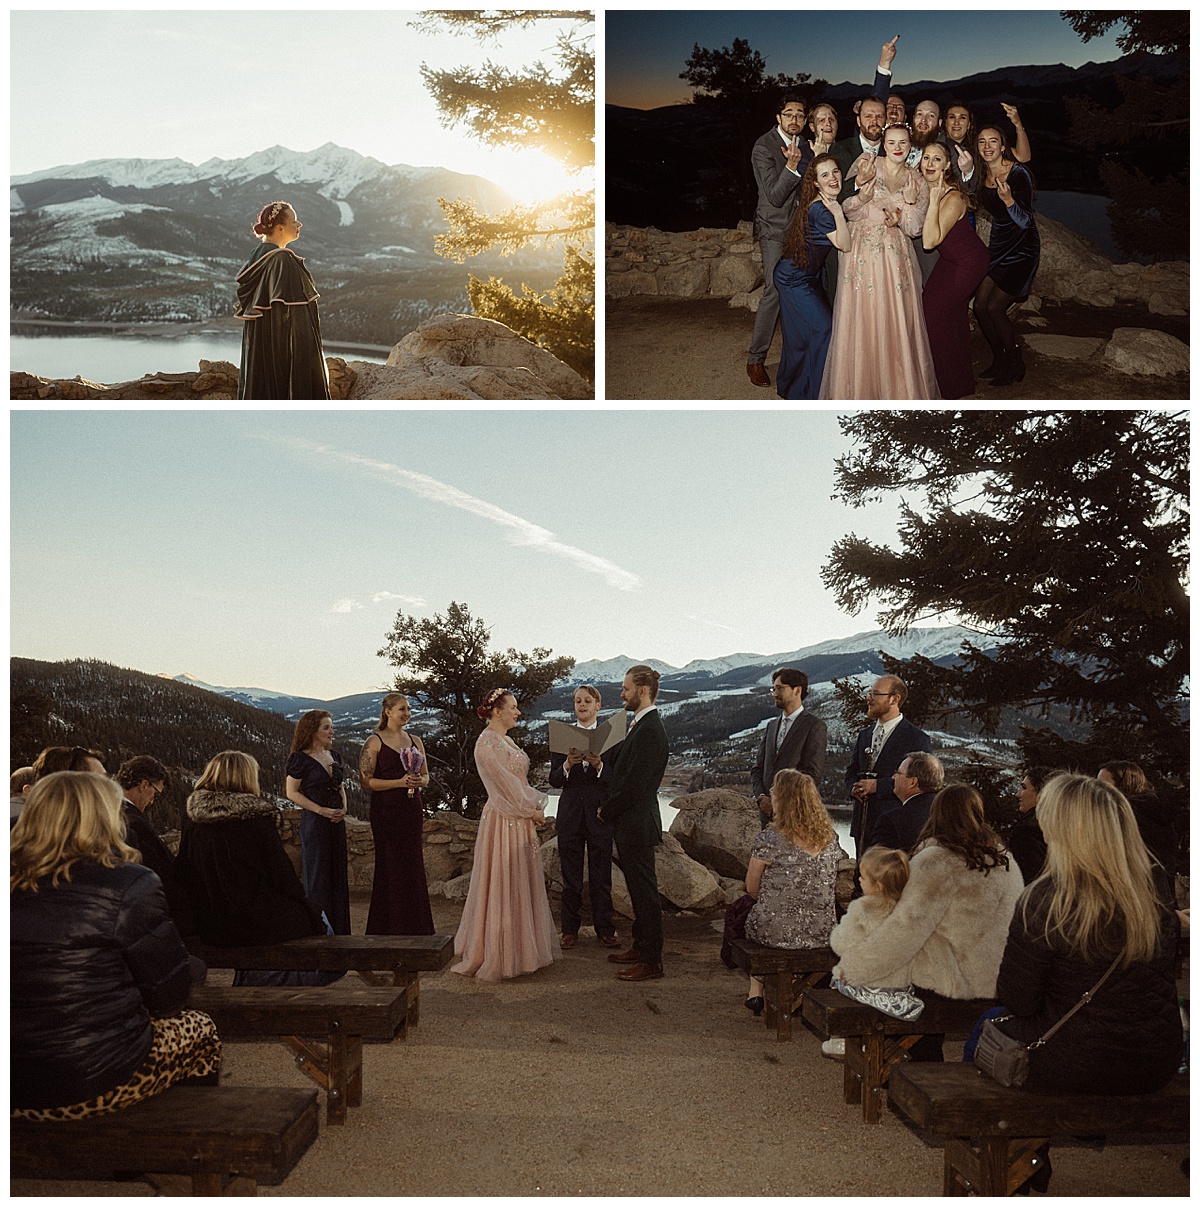 Eloping at Sapphire Point Overlook is a great choice for intimate weddings, like what this couple did.